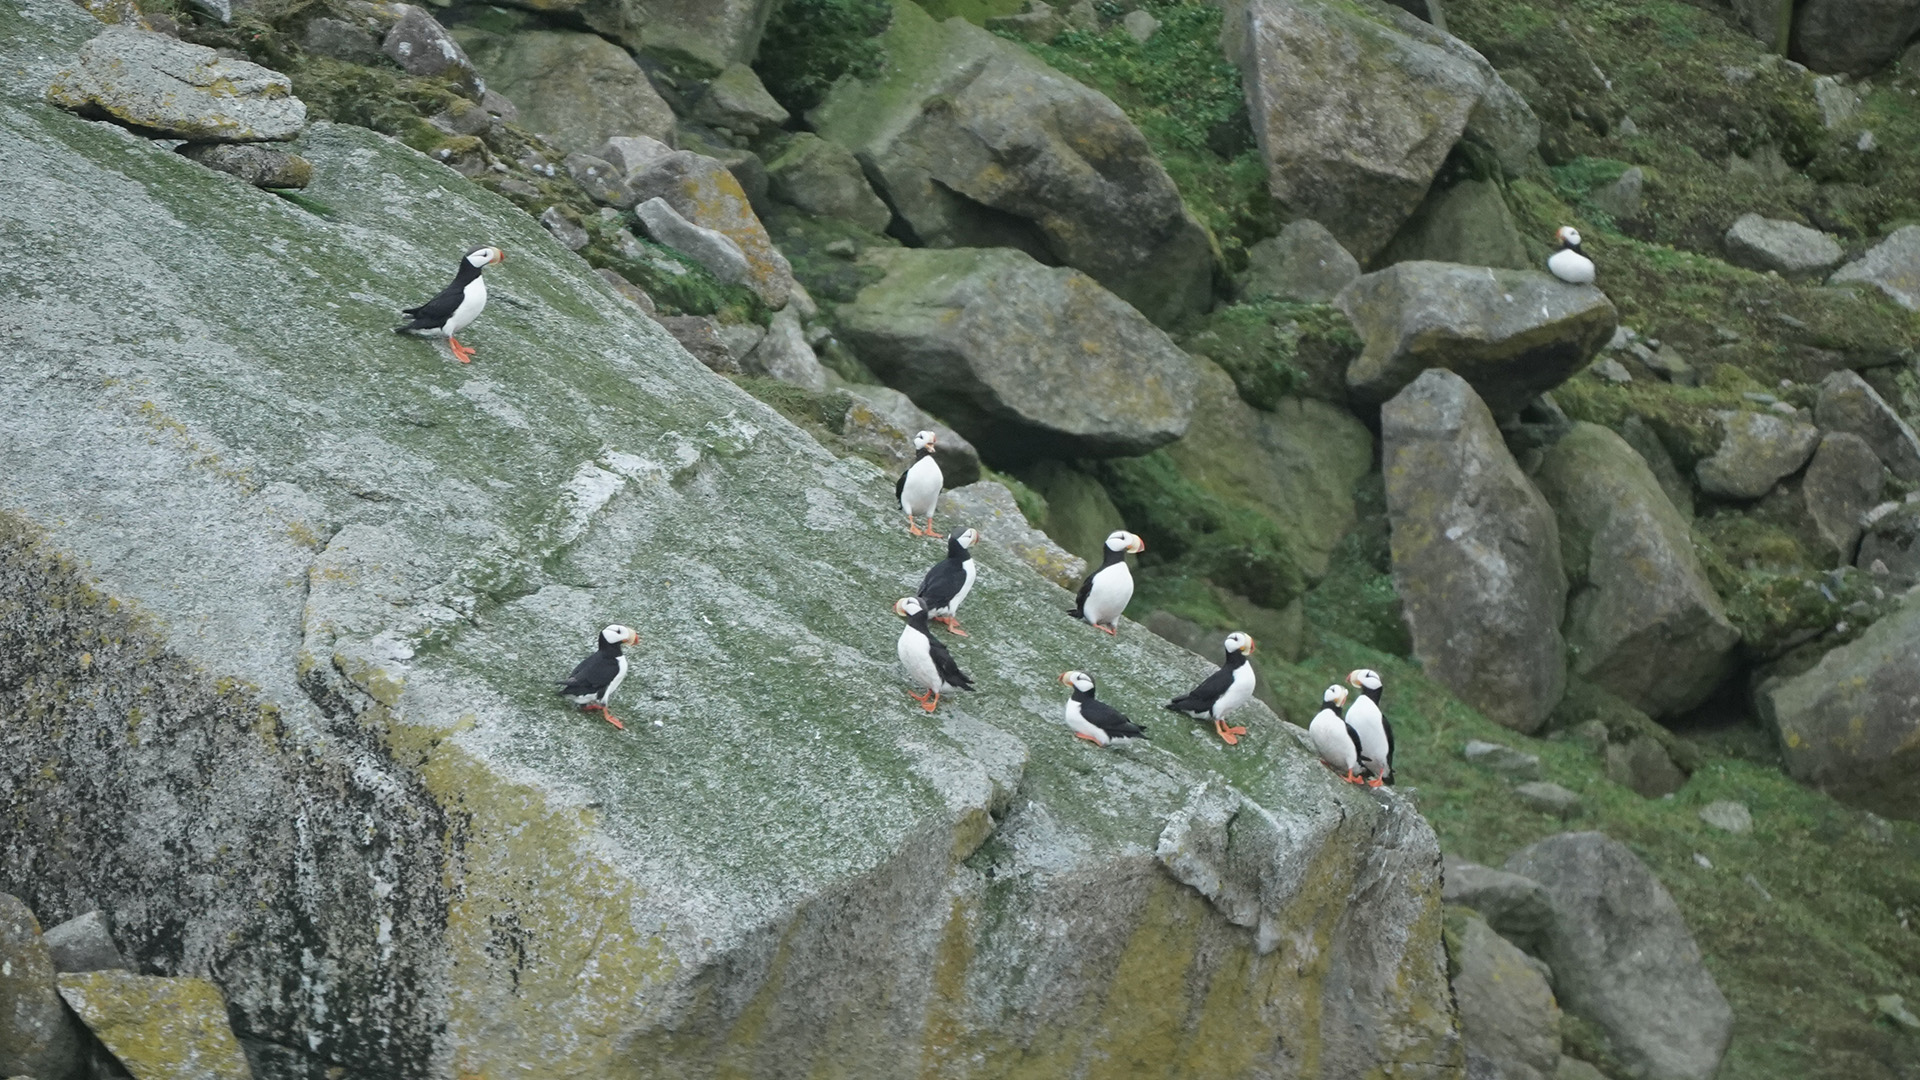 Puffins on the rocks on St. This is from First Alaskans. [Photo of the day - January 2023]